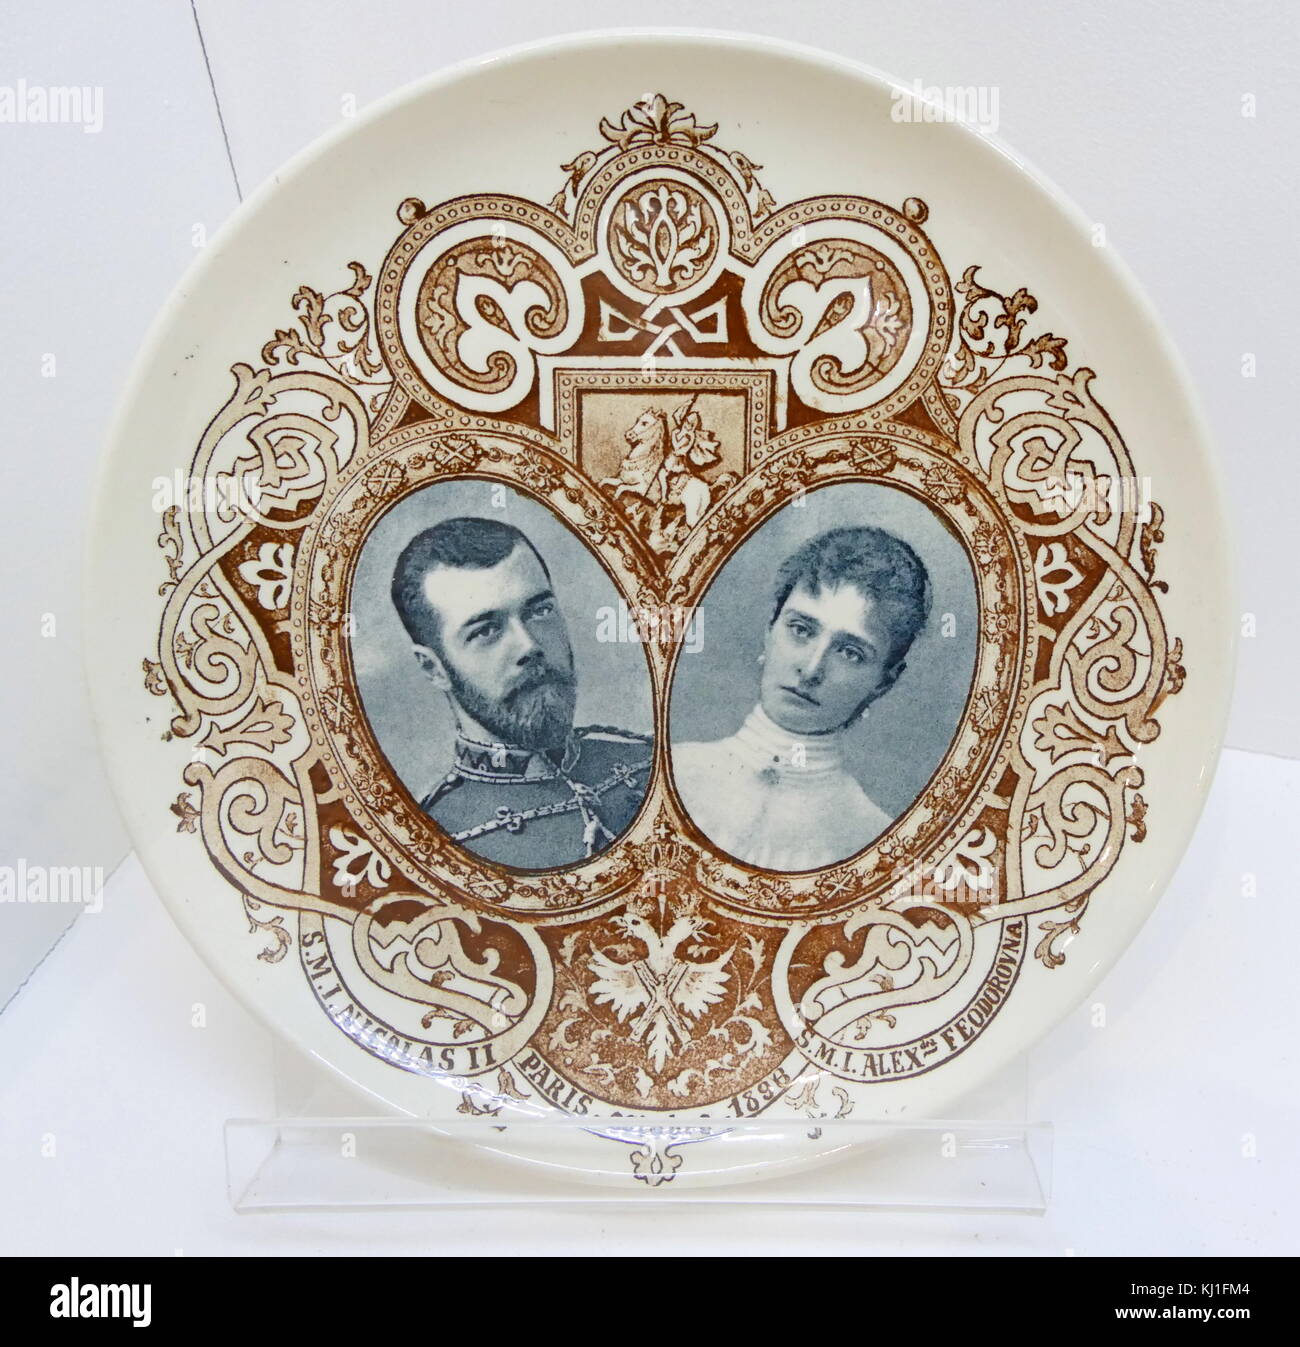 A plate made in honour of the royal couple's arrival in France in 1896, on the occasion of the coronation of Emperor Nicholas I and Empress Alexandra Feodorovna. Stock Photo